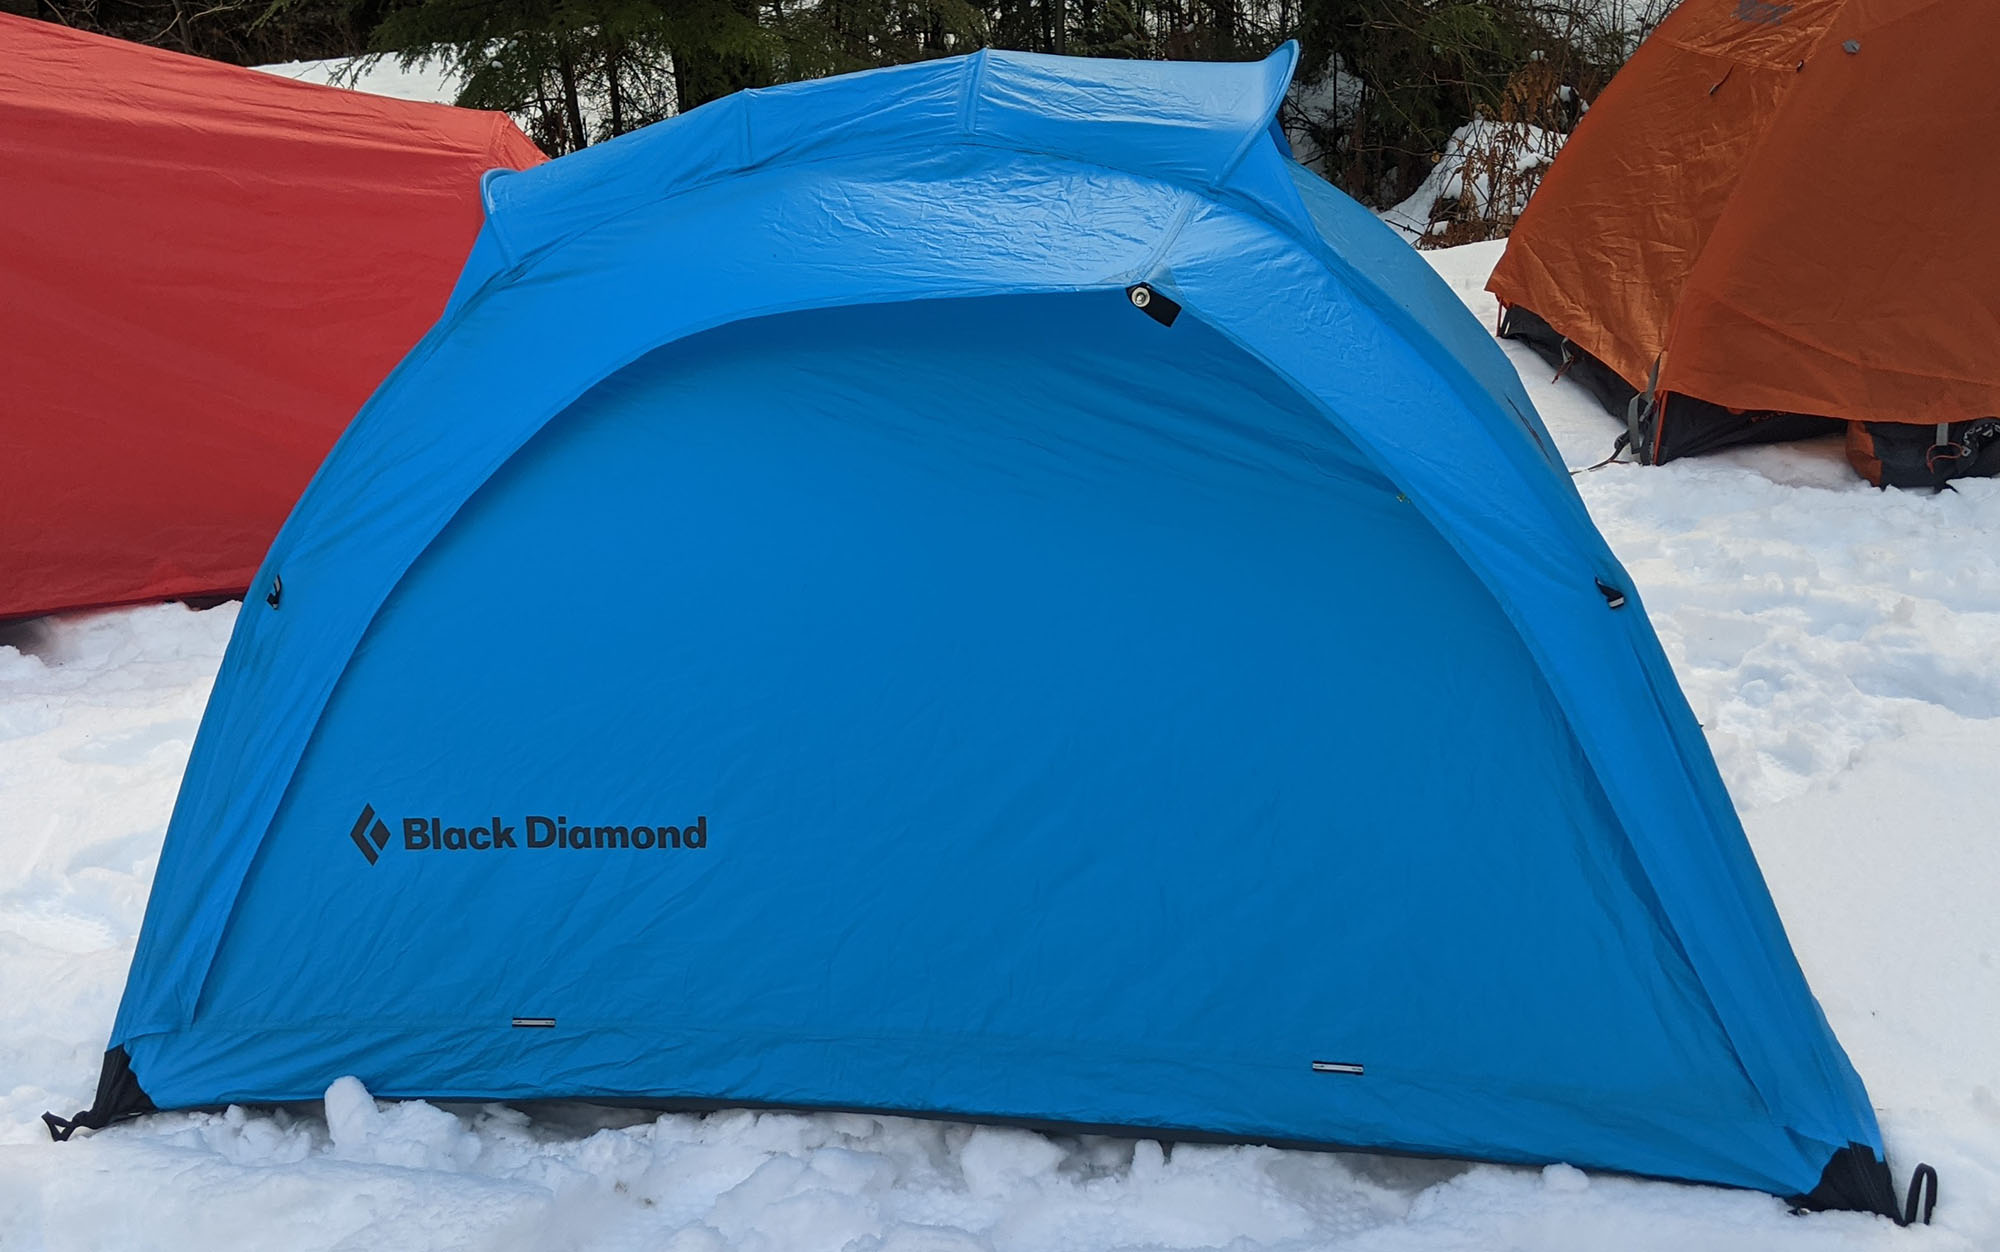 The Black Diamond Hilight achieves a storm-worthy design with a minimal amount of fuss.